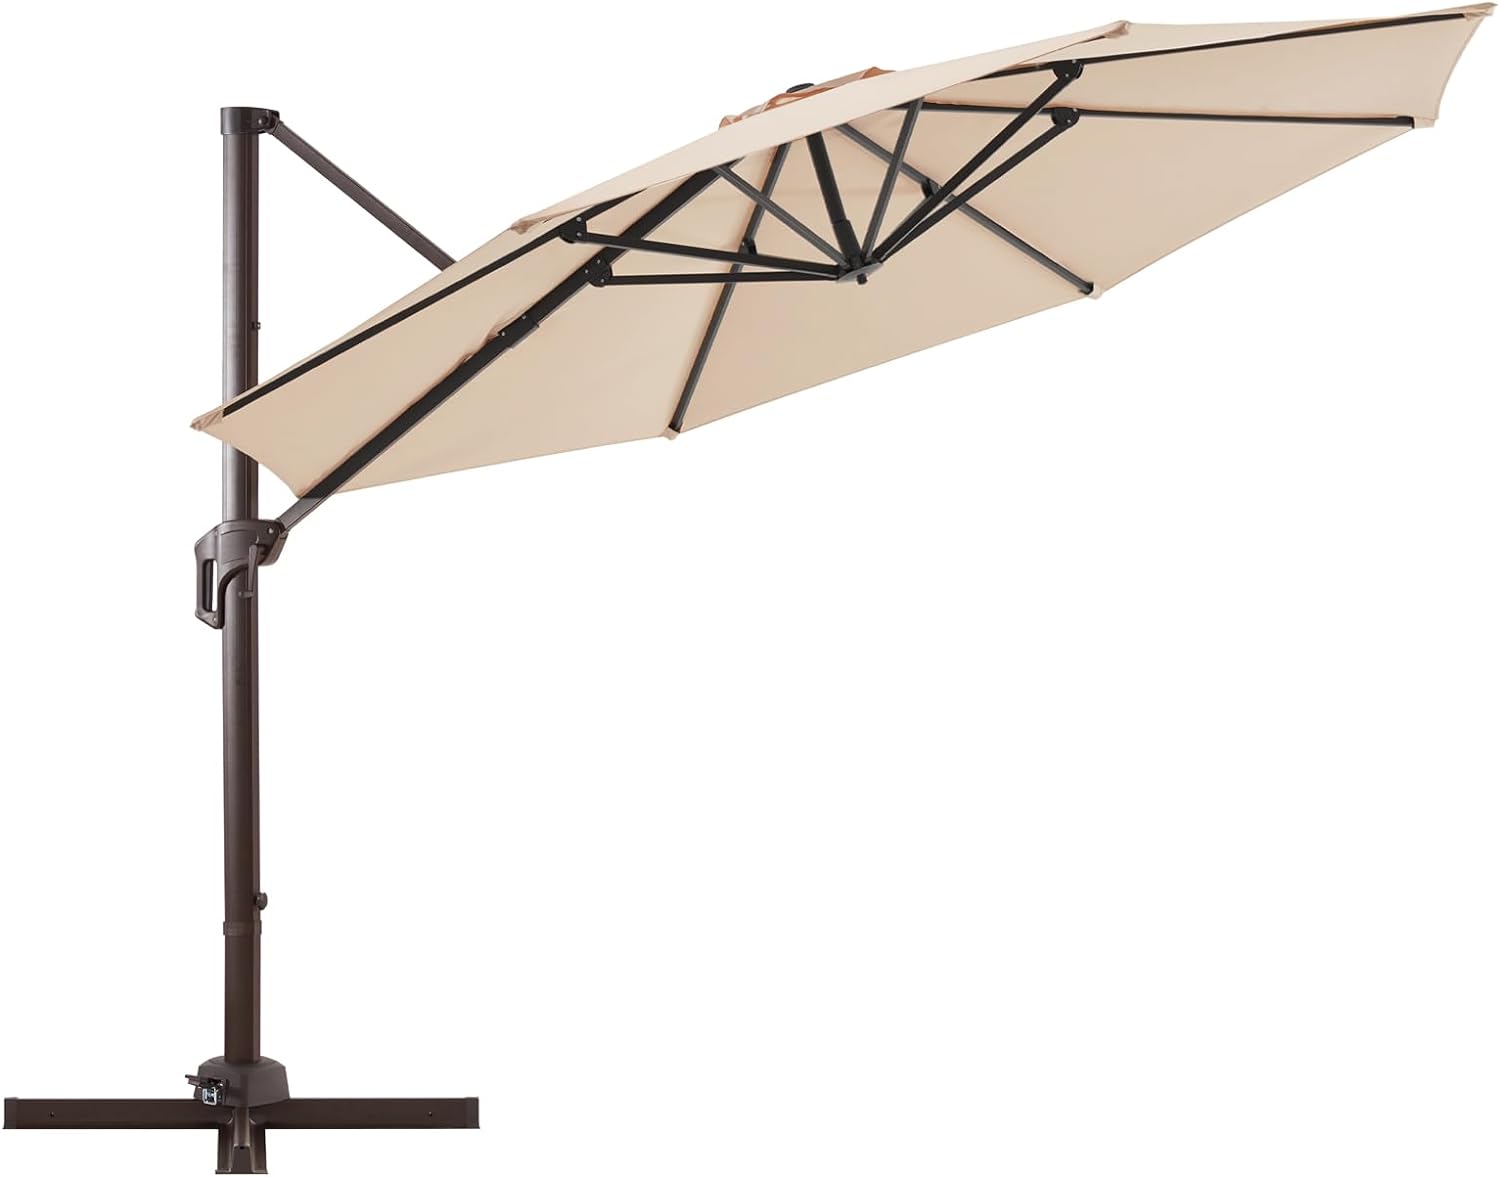 wikiwiki 11 FT Cantilever Patio Umbrellas Outdoor Offset Umbrella w/ 36 Month Fade Resistance Recycled Fabric, 6-Level 360Rotation Aluminum Pole for Deck Pool Garden, Beige